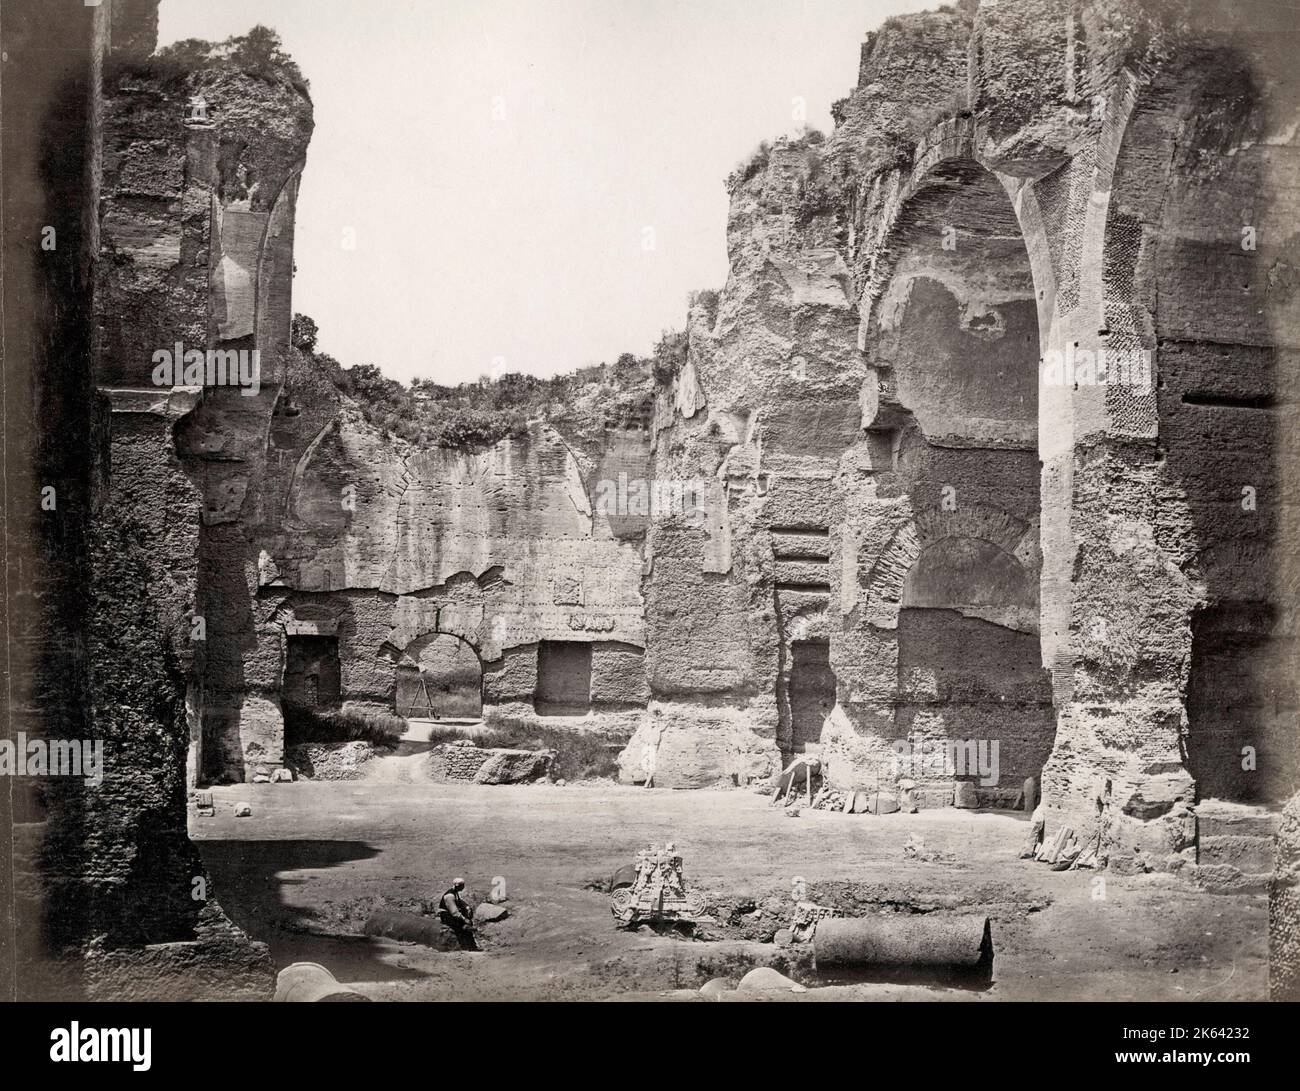 Central chamber of the Baths of  Caracalla, Rome, Italy. Vintage 19th century photograph. Stock Photo